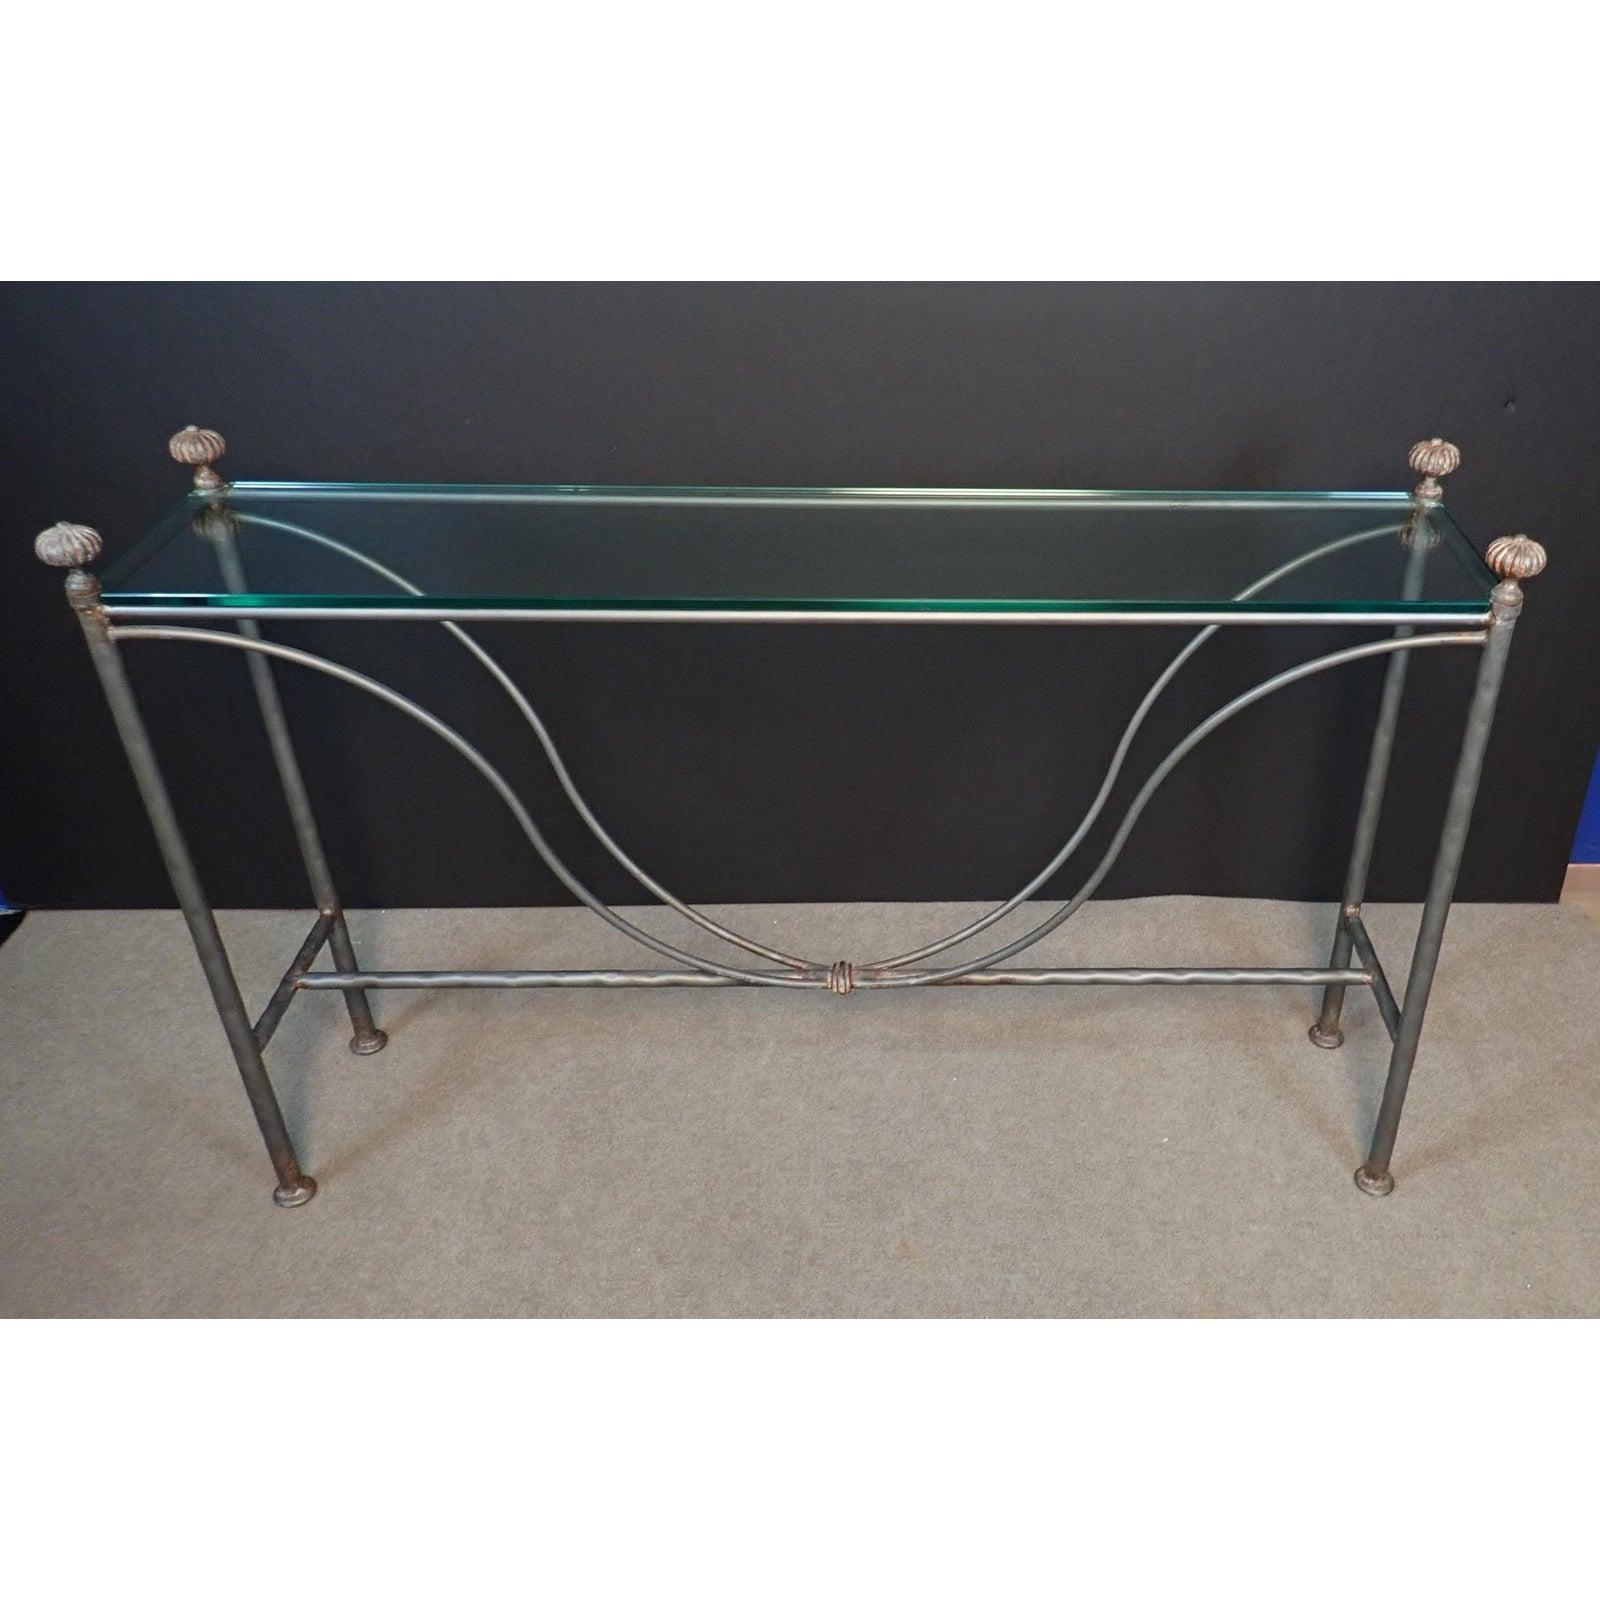 Mid-Century Gun Metal Patina Modern Glass Top Iron Console Table. Glass top wrought iron console table. Elegant design and tailored narrow lines.